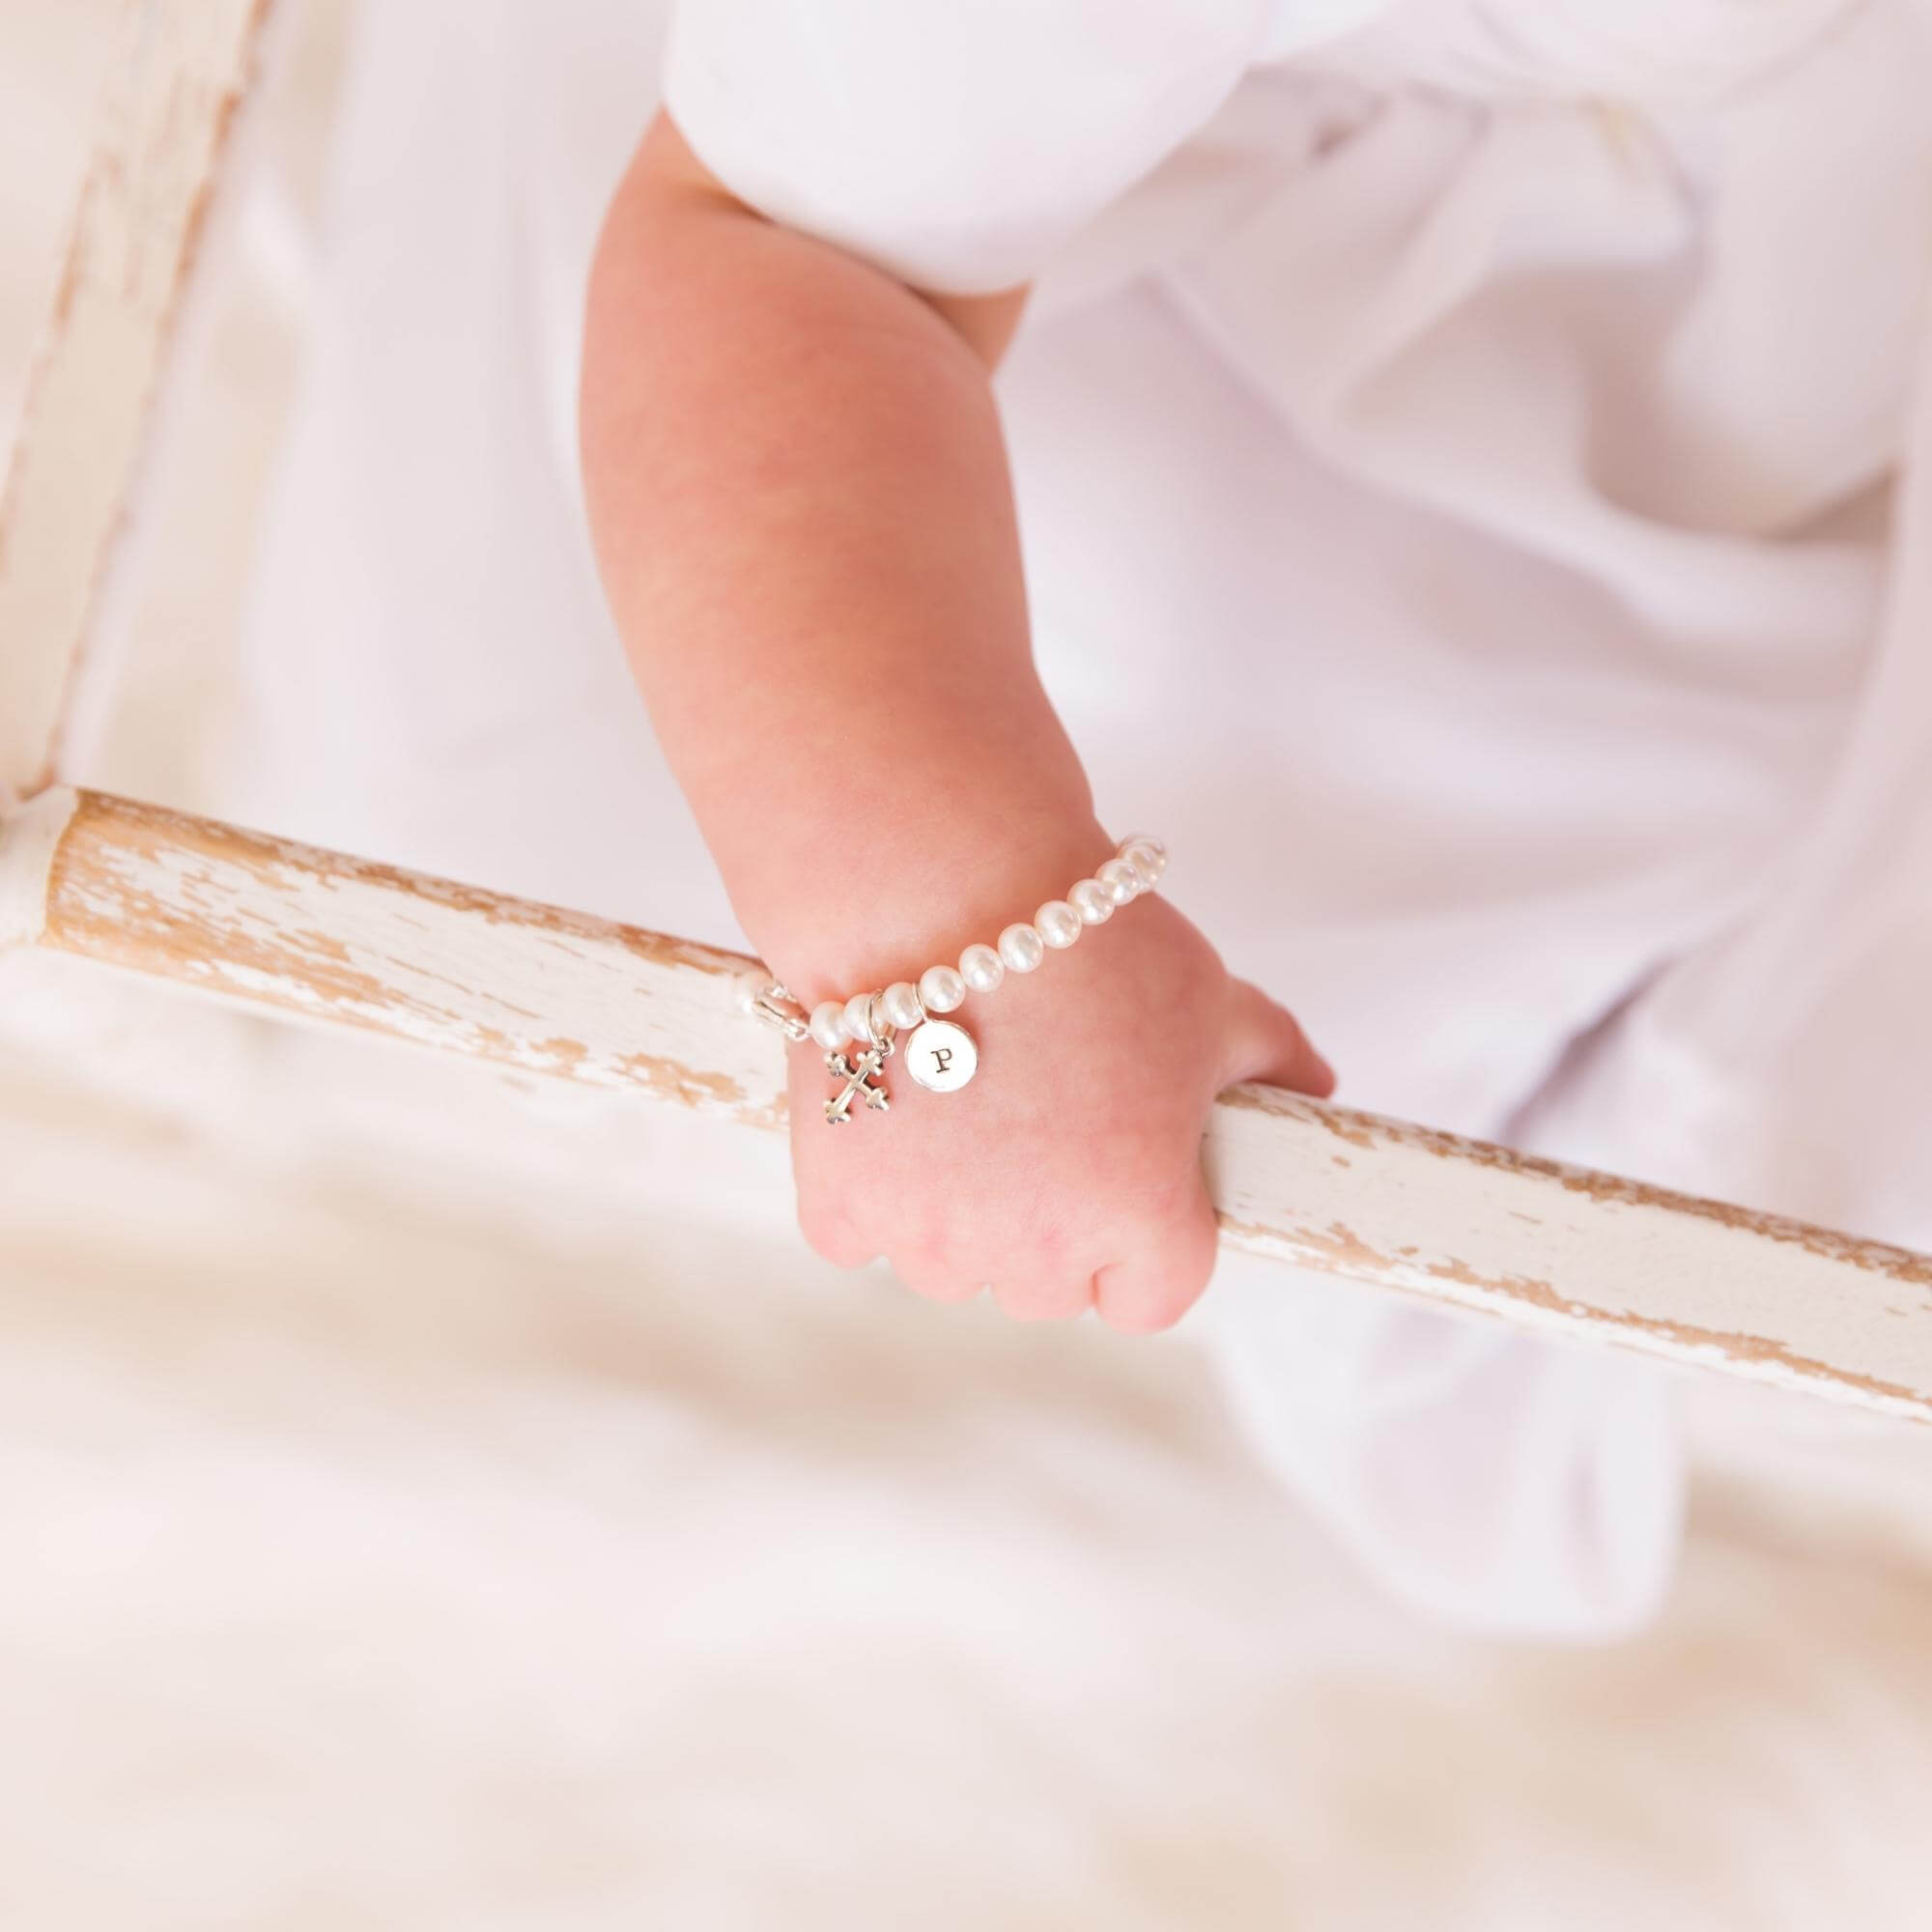 Pearl Baptism Bracelet By Grow-With-Me® BeadifulBABY, 51% OFF